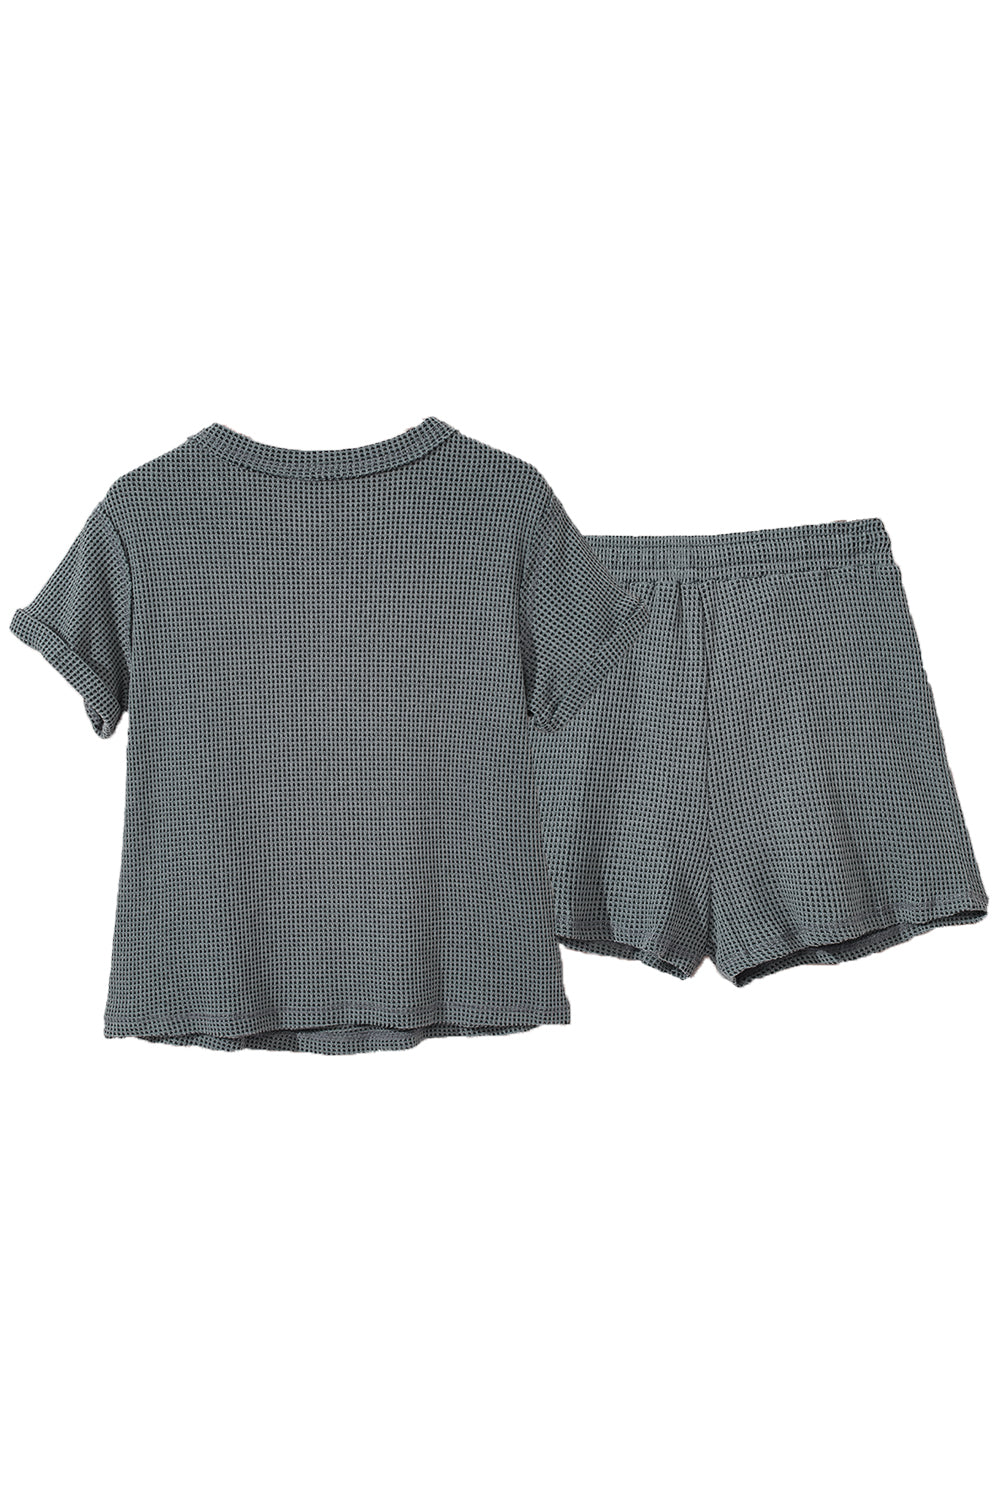 Laurel Green Waffle Knit Buttoned Top and Drawstring Shorts Set